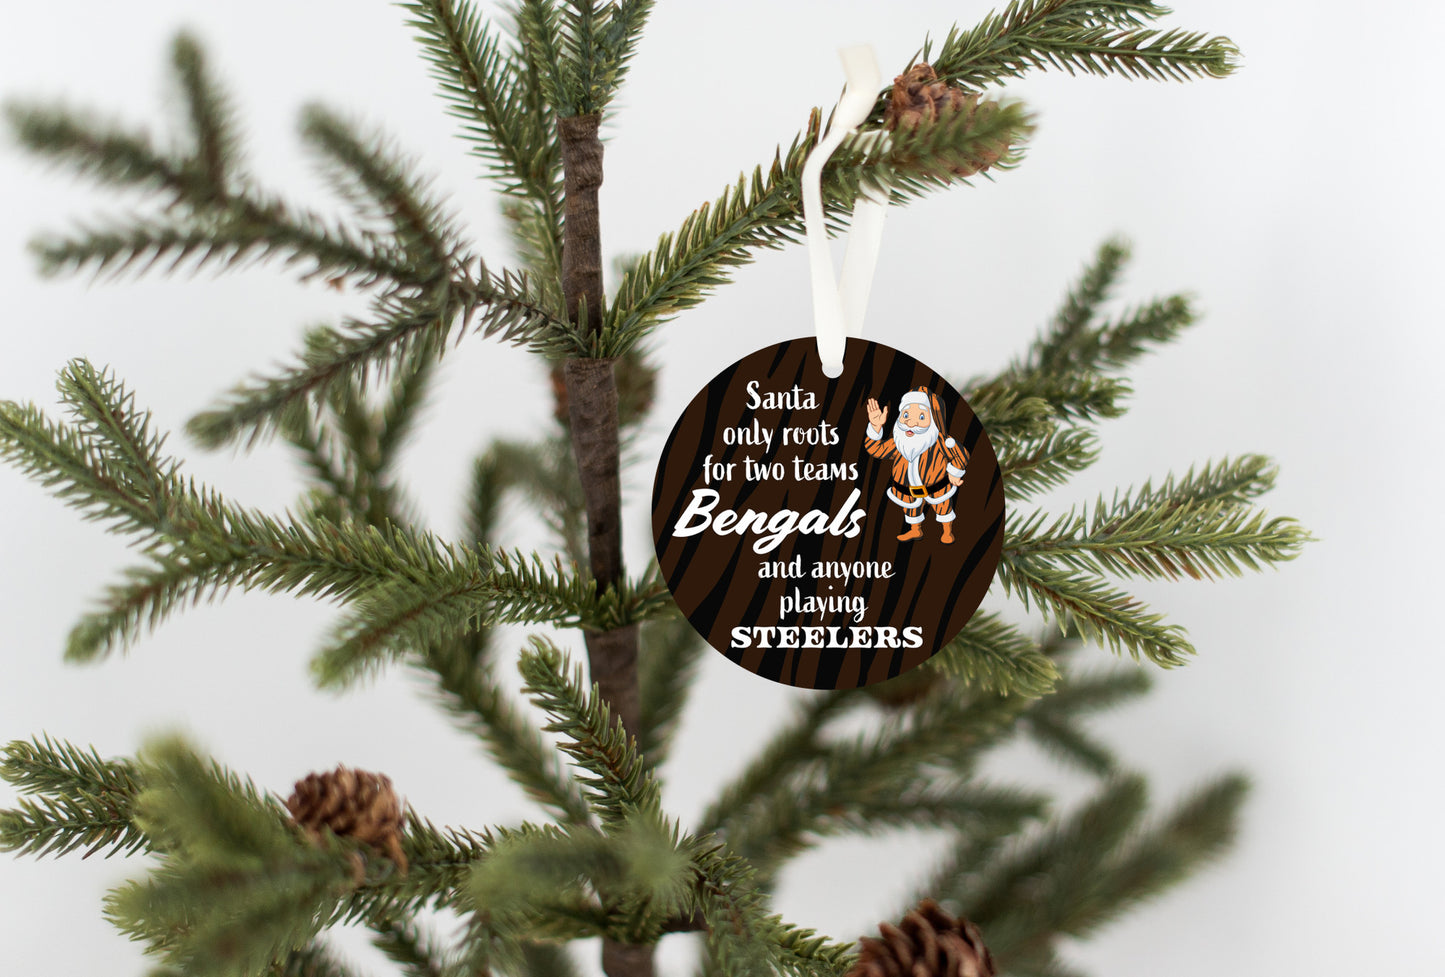 Santa Only Roots For Two Teams Bengals And Anyone Playing Steelers Ornament